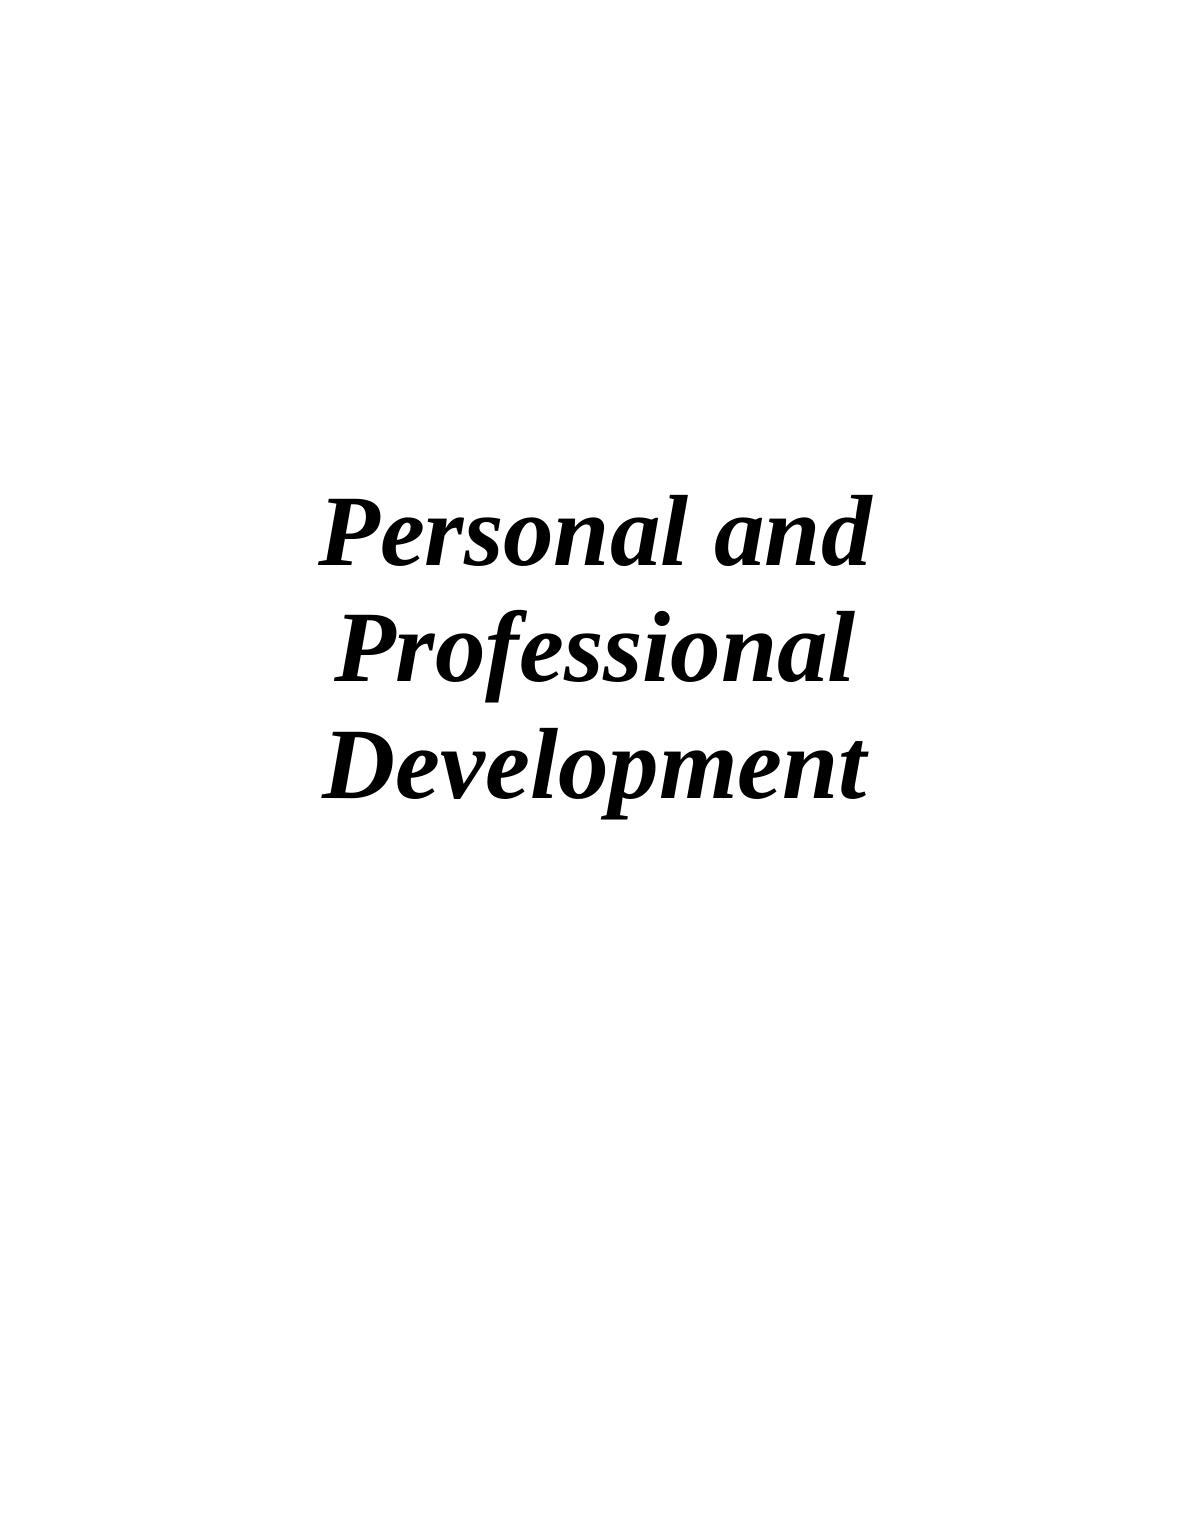 Personal and Professional Development - Doc_1